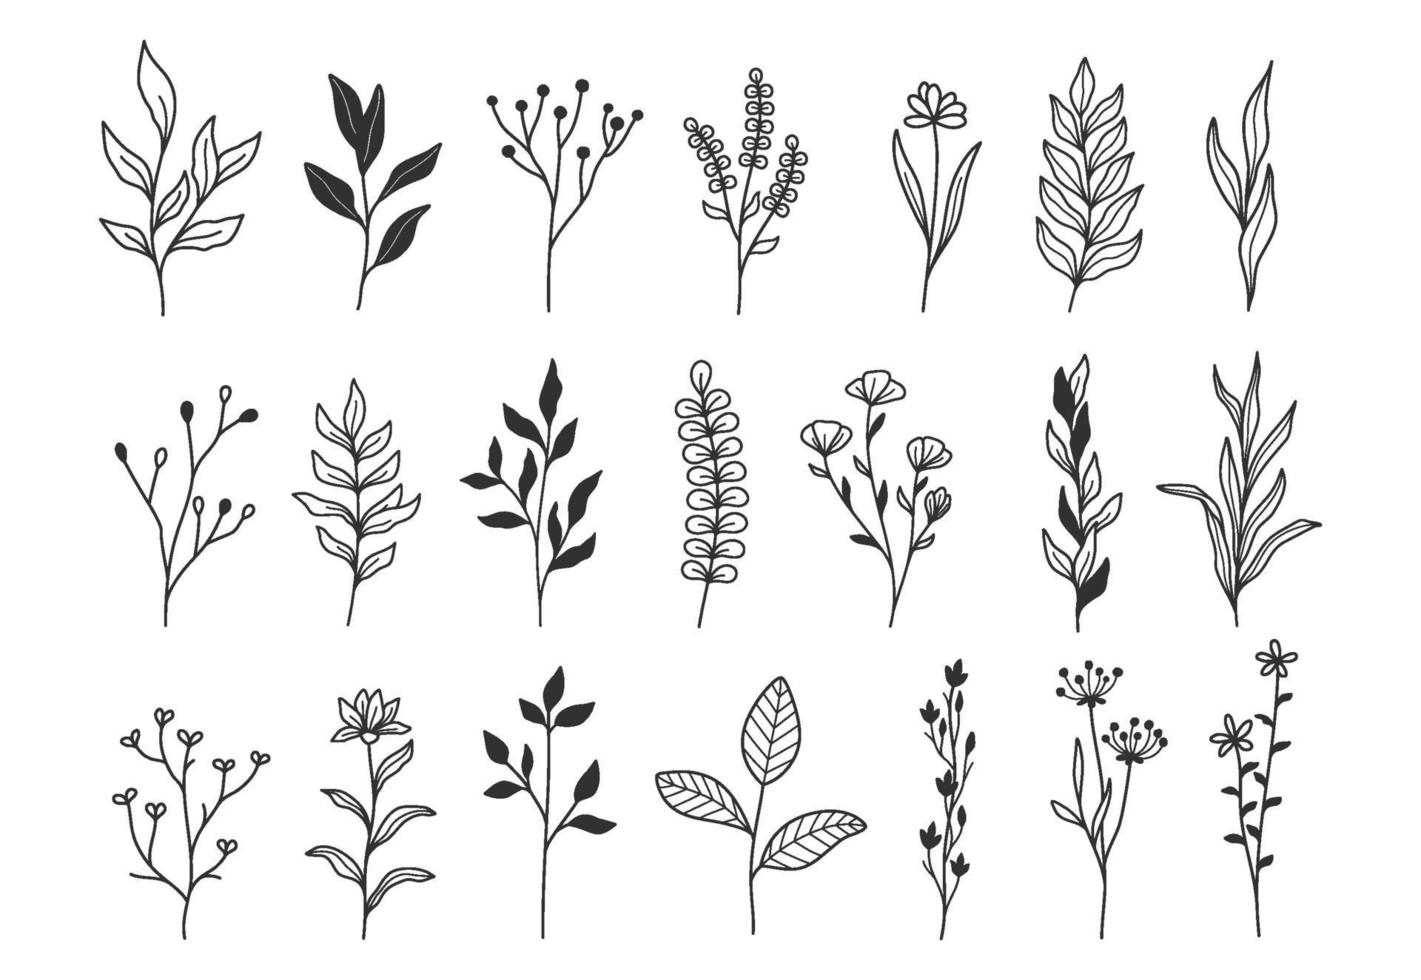 Plants And Flowers, Botanical Illustrations vector